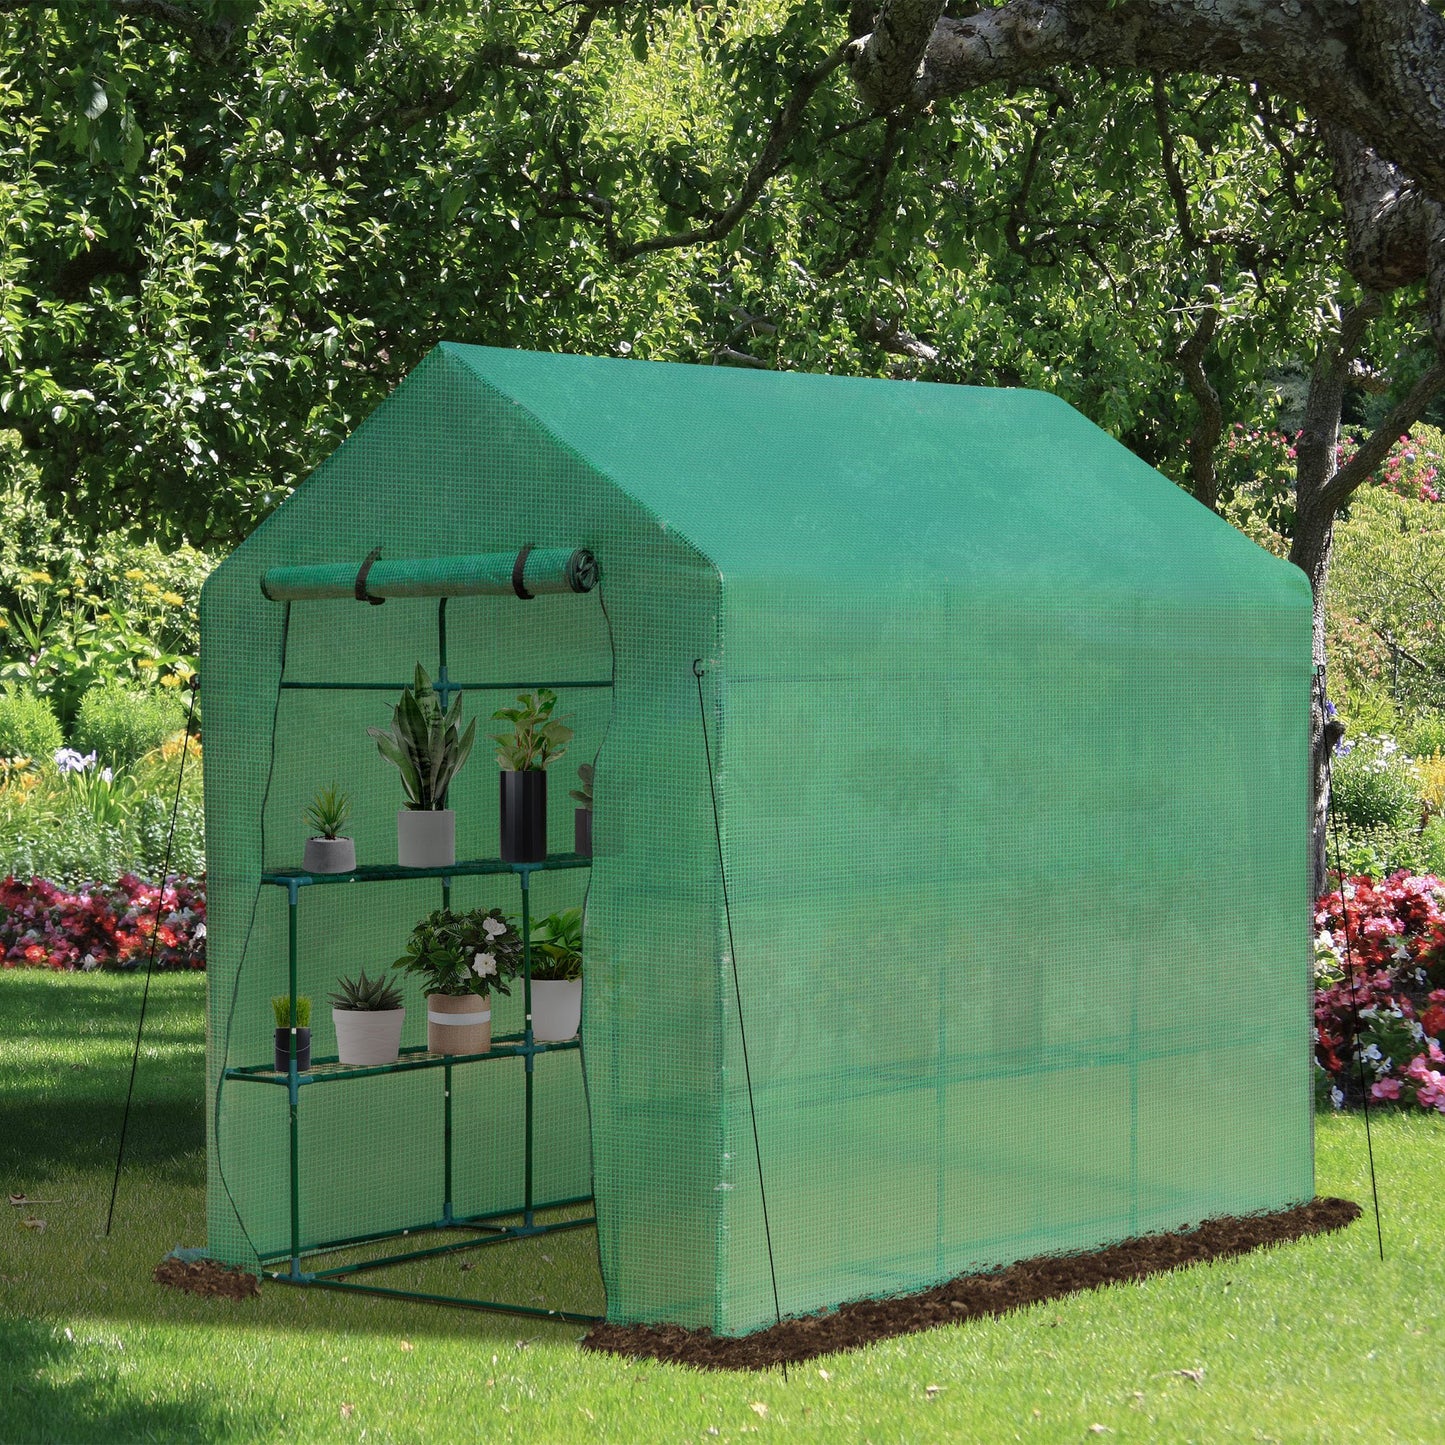 Outsunny 2 Tier Greenhouse Outdoor Garden with Roll up Door Green 7x4.7ft